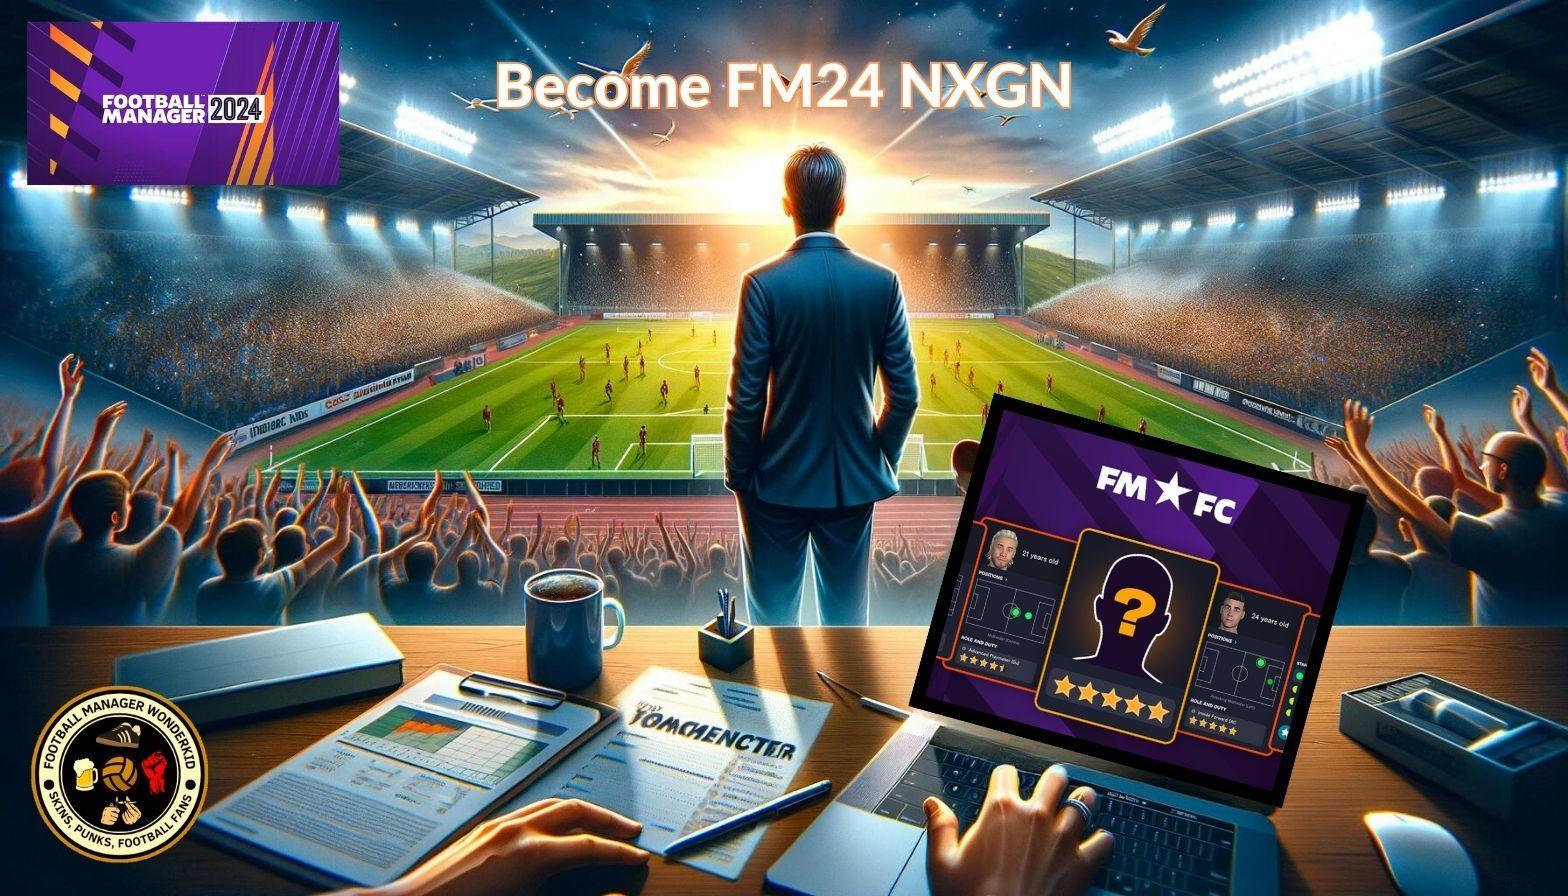 Become a Football Manager 24 Newgen with FMFC